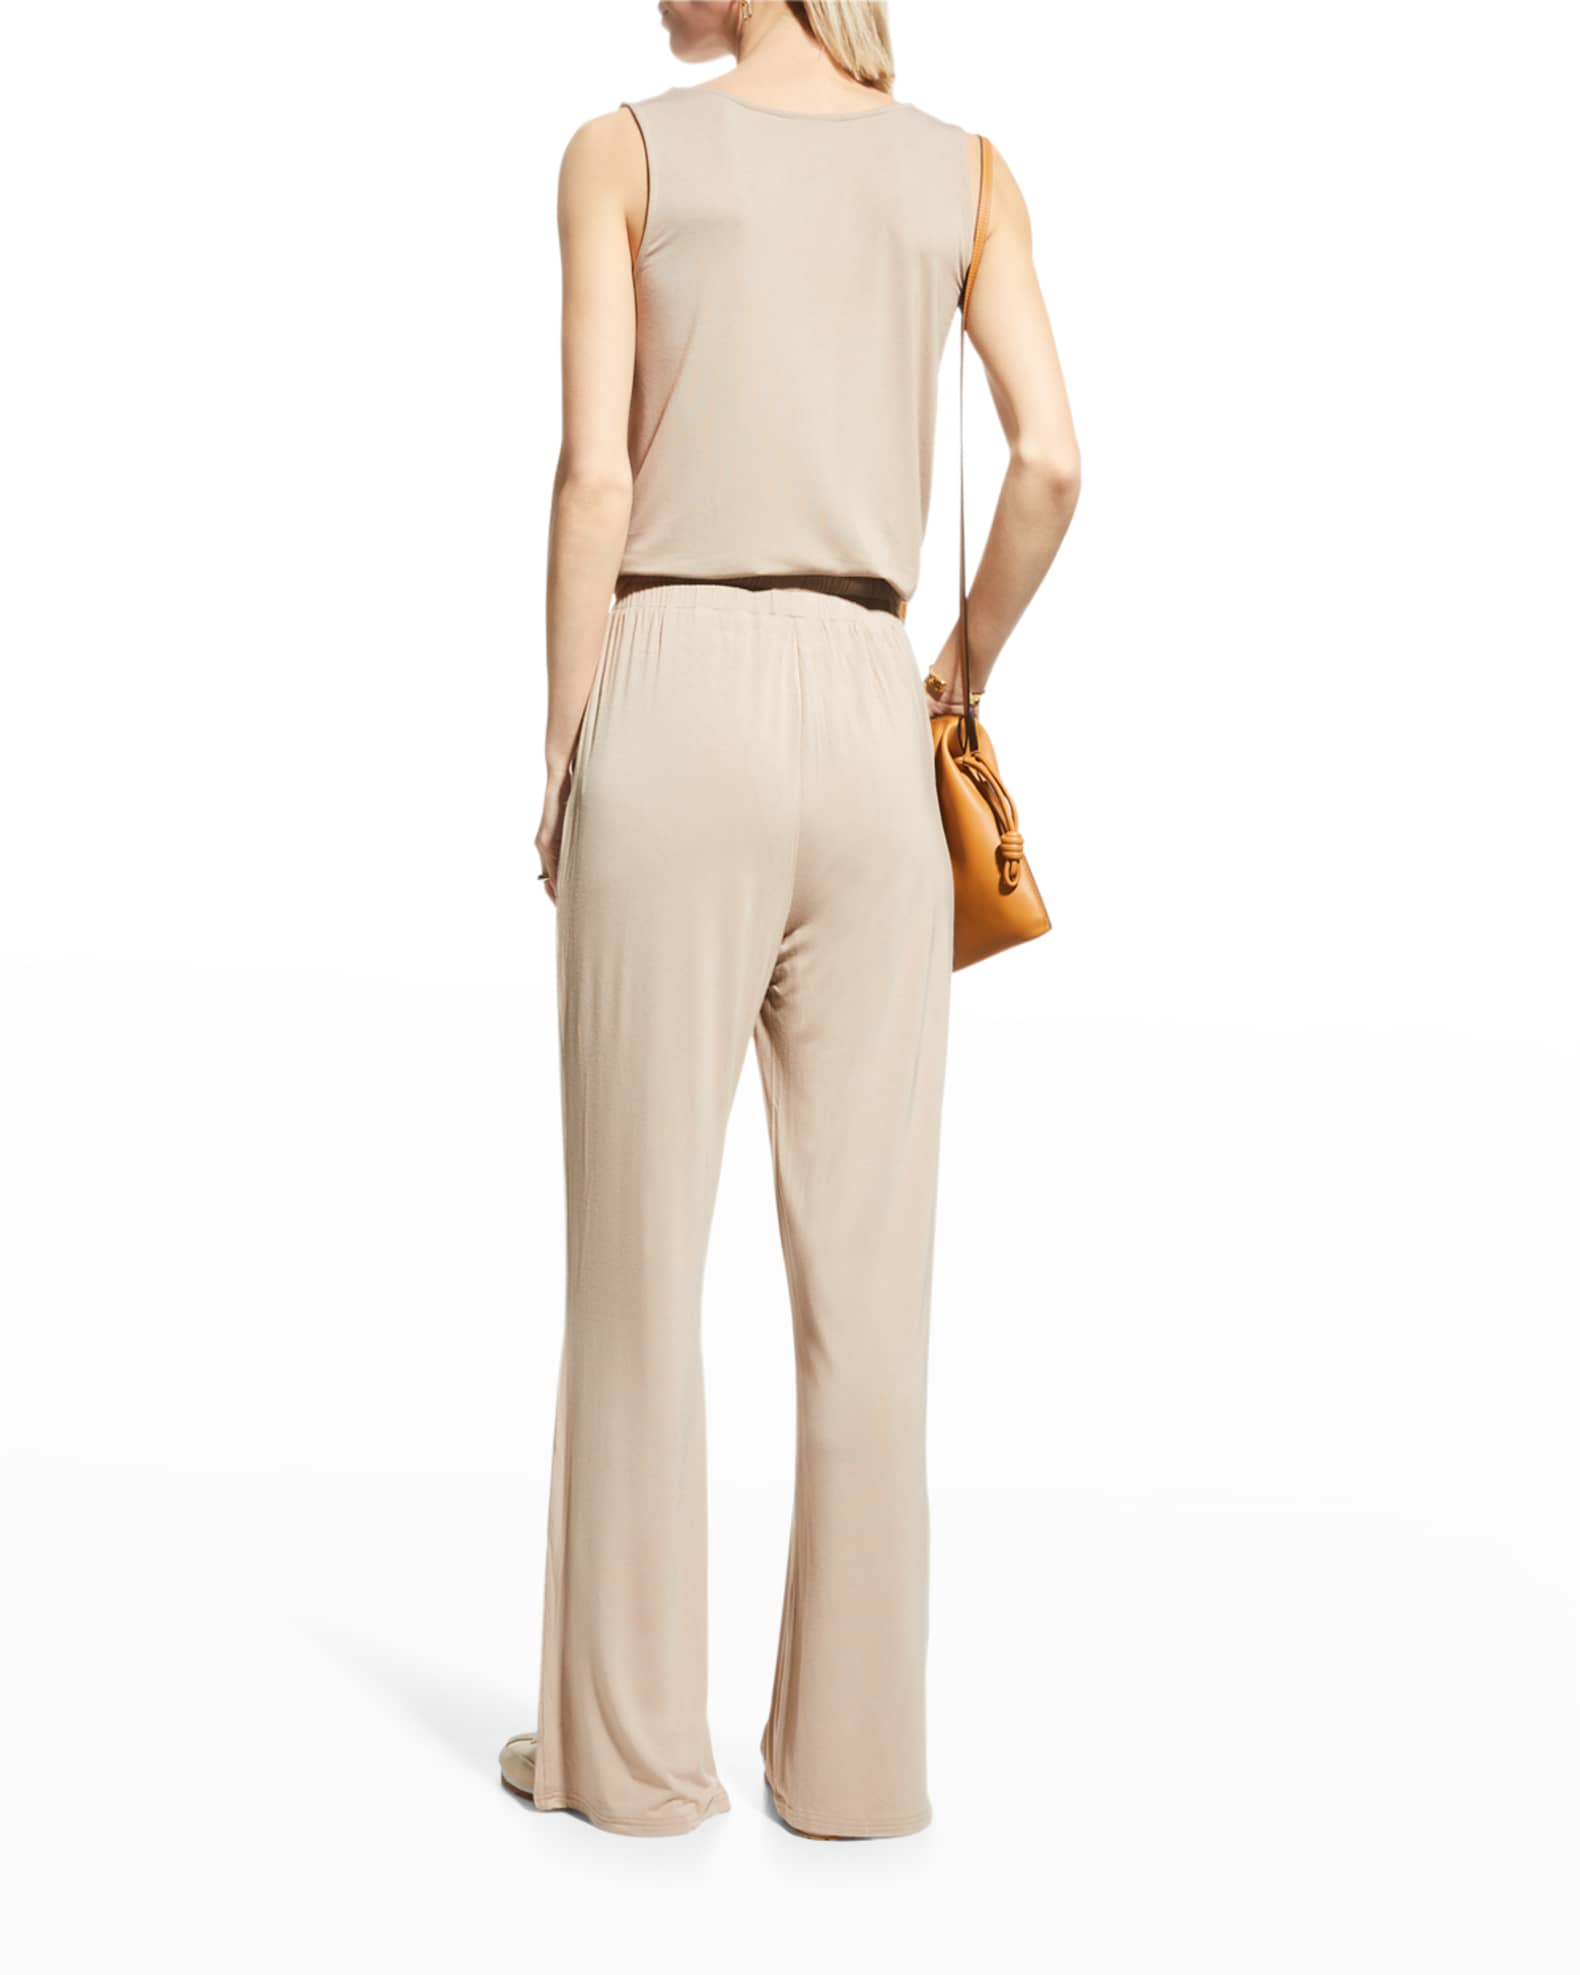 CAPSULE 121 The Humility High-Rise Jersey Pants | Neiman Marcus